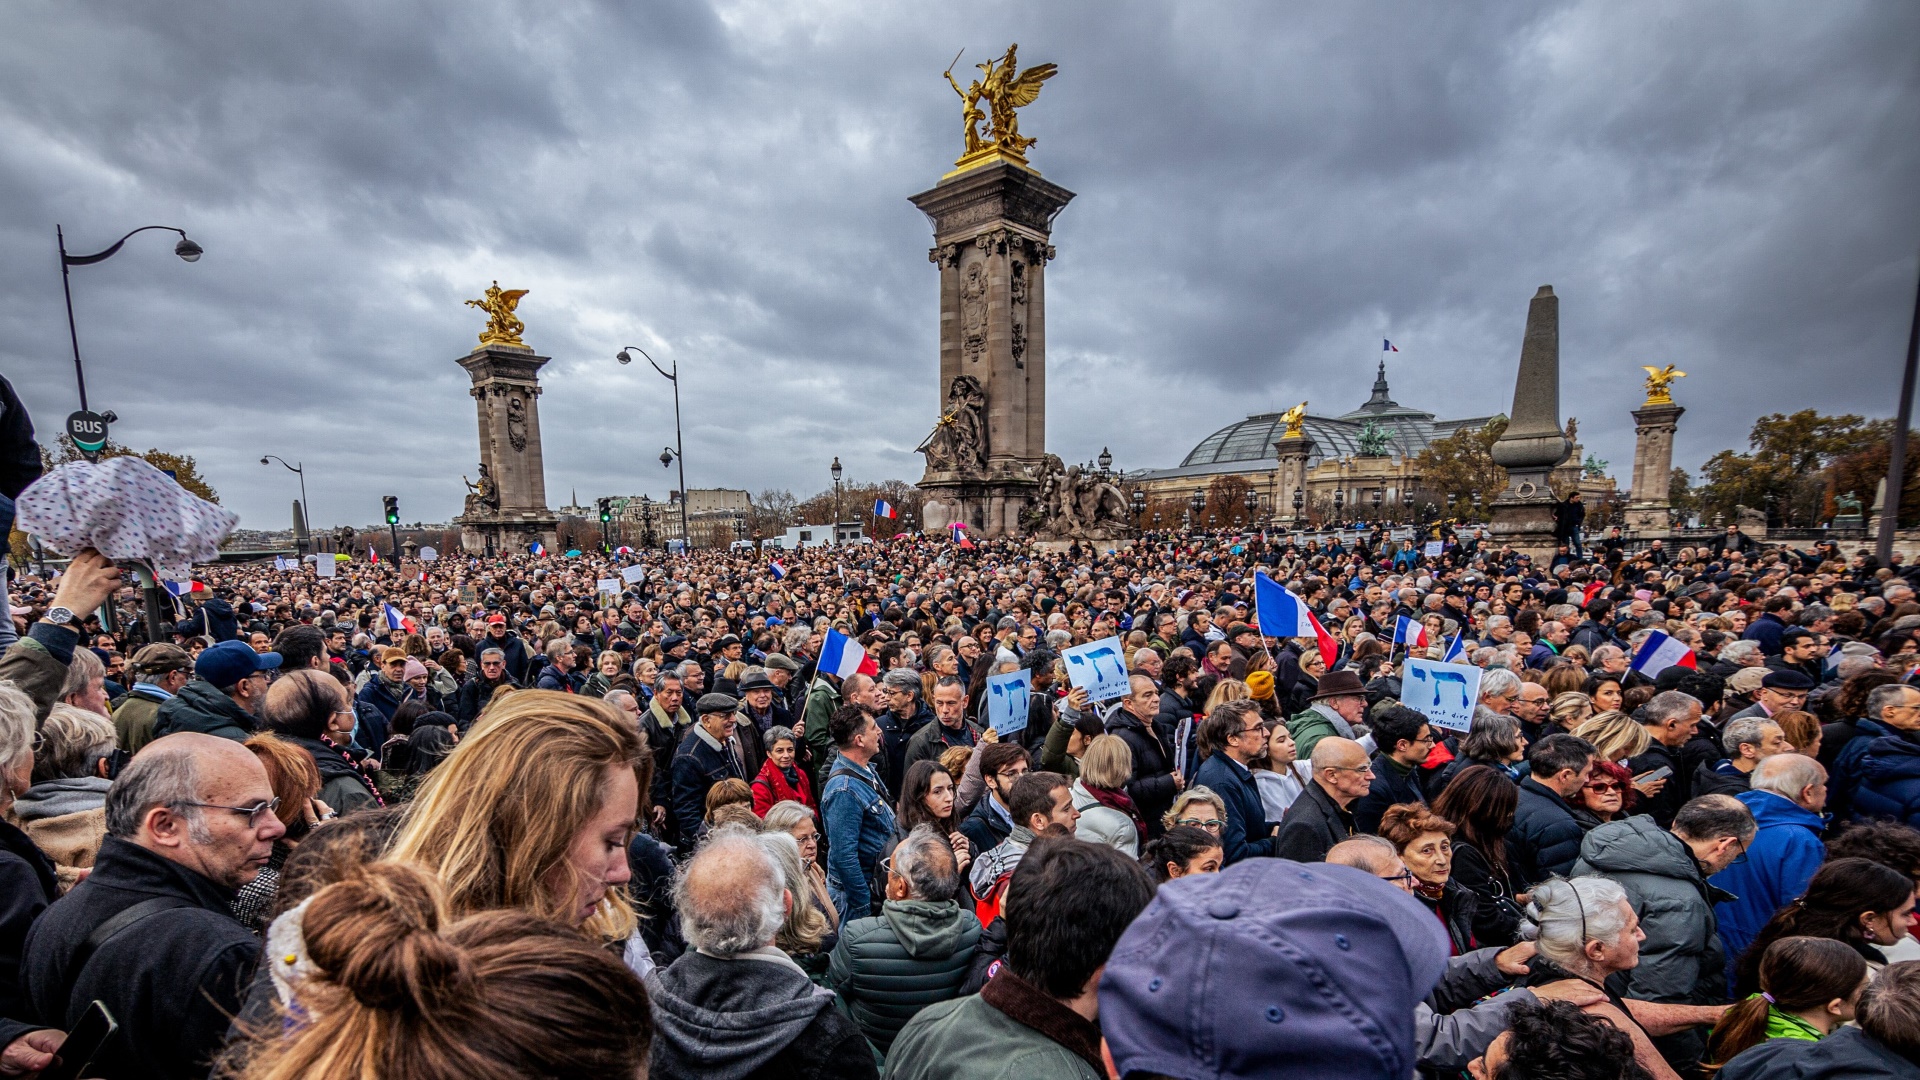 More than 100,000 Parisians take part in a rally against antisemitism. Photo: Telmo Pinto/SOPA Images/LightRocket/Getty
